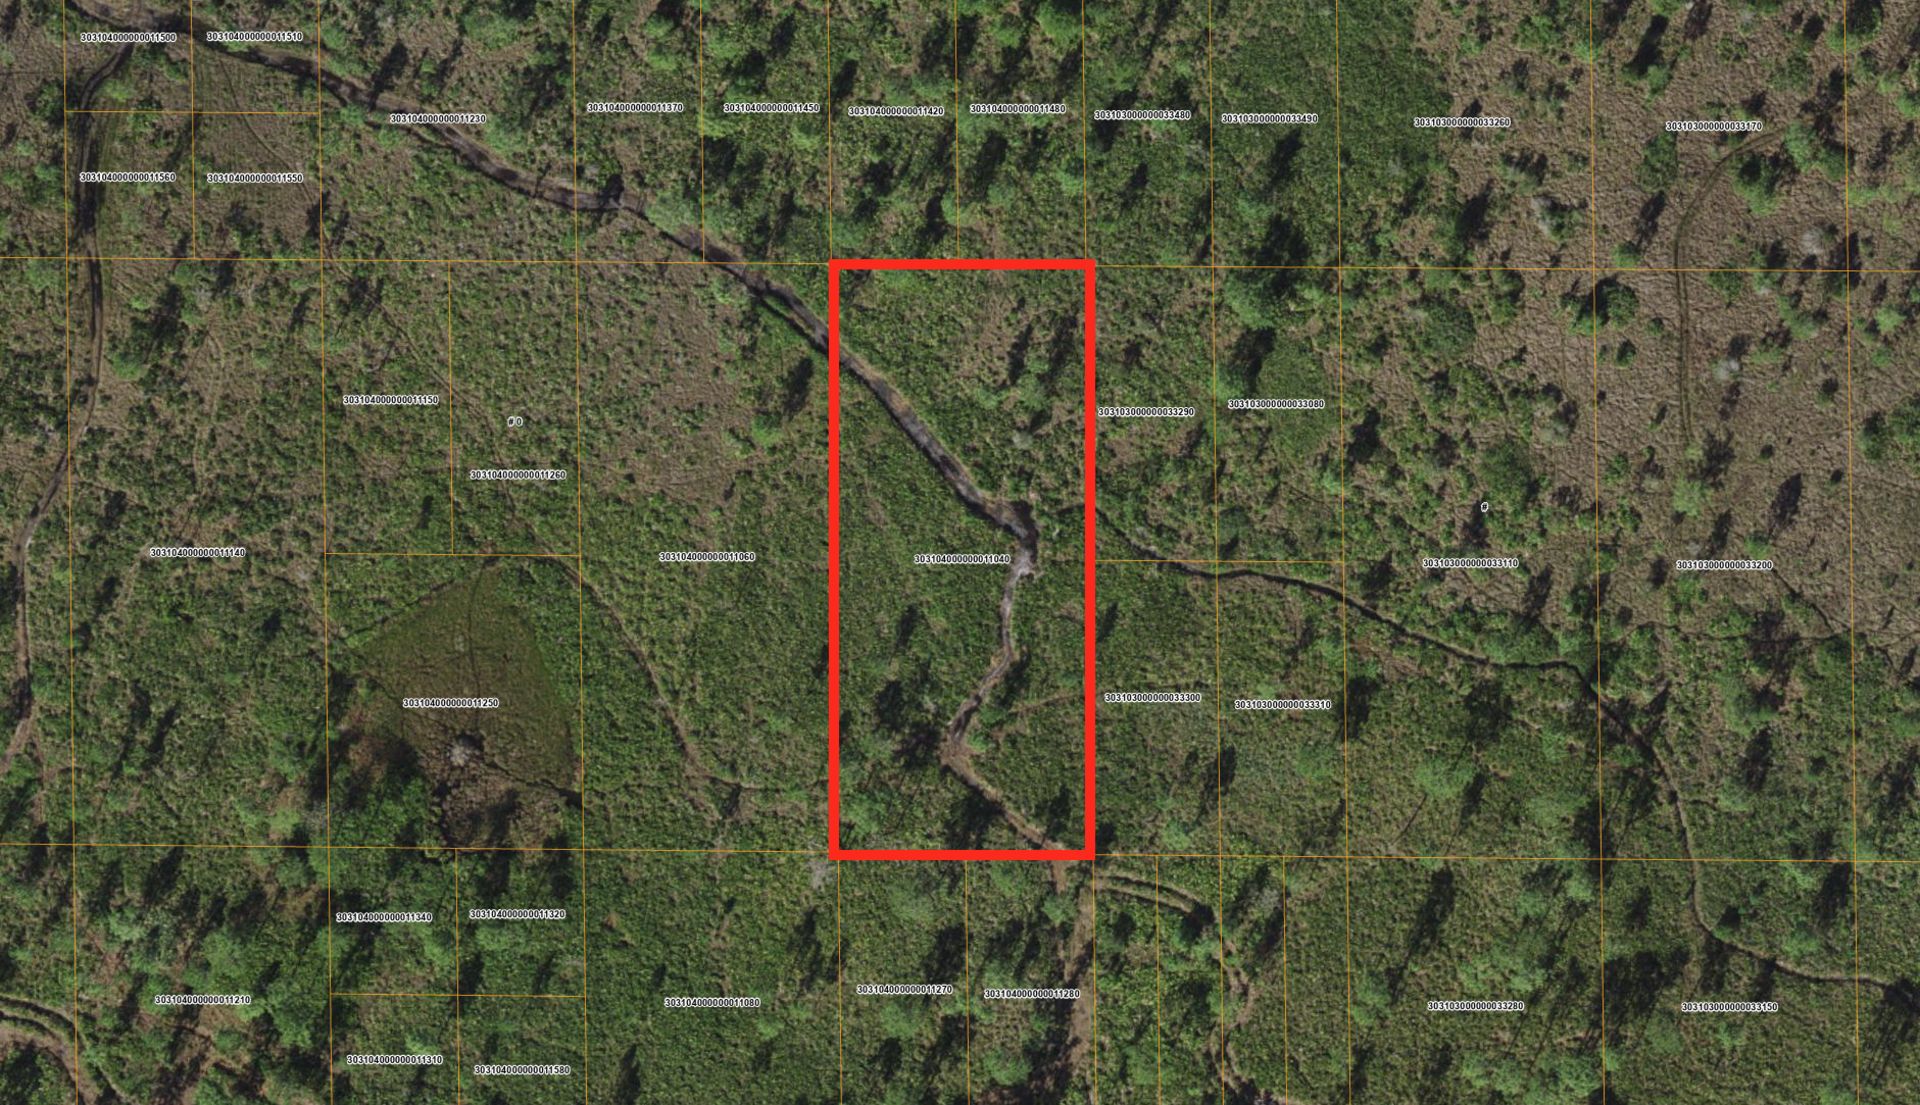 Almost 1.5 Acres Surrounded by Lakes in Sunny Florida! - Image 2 of 10